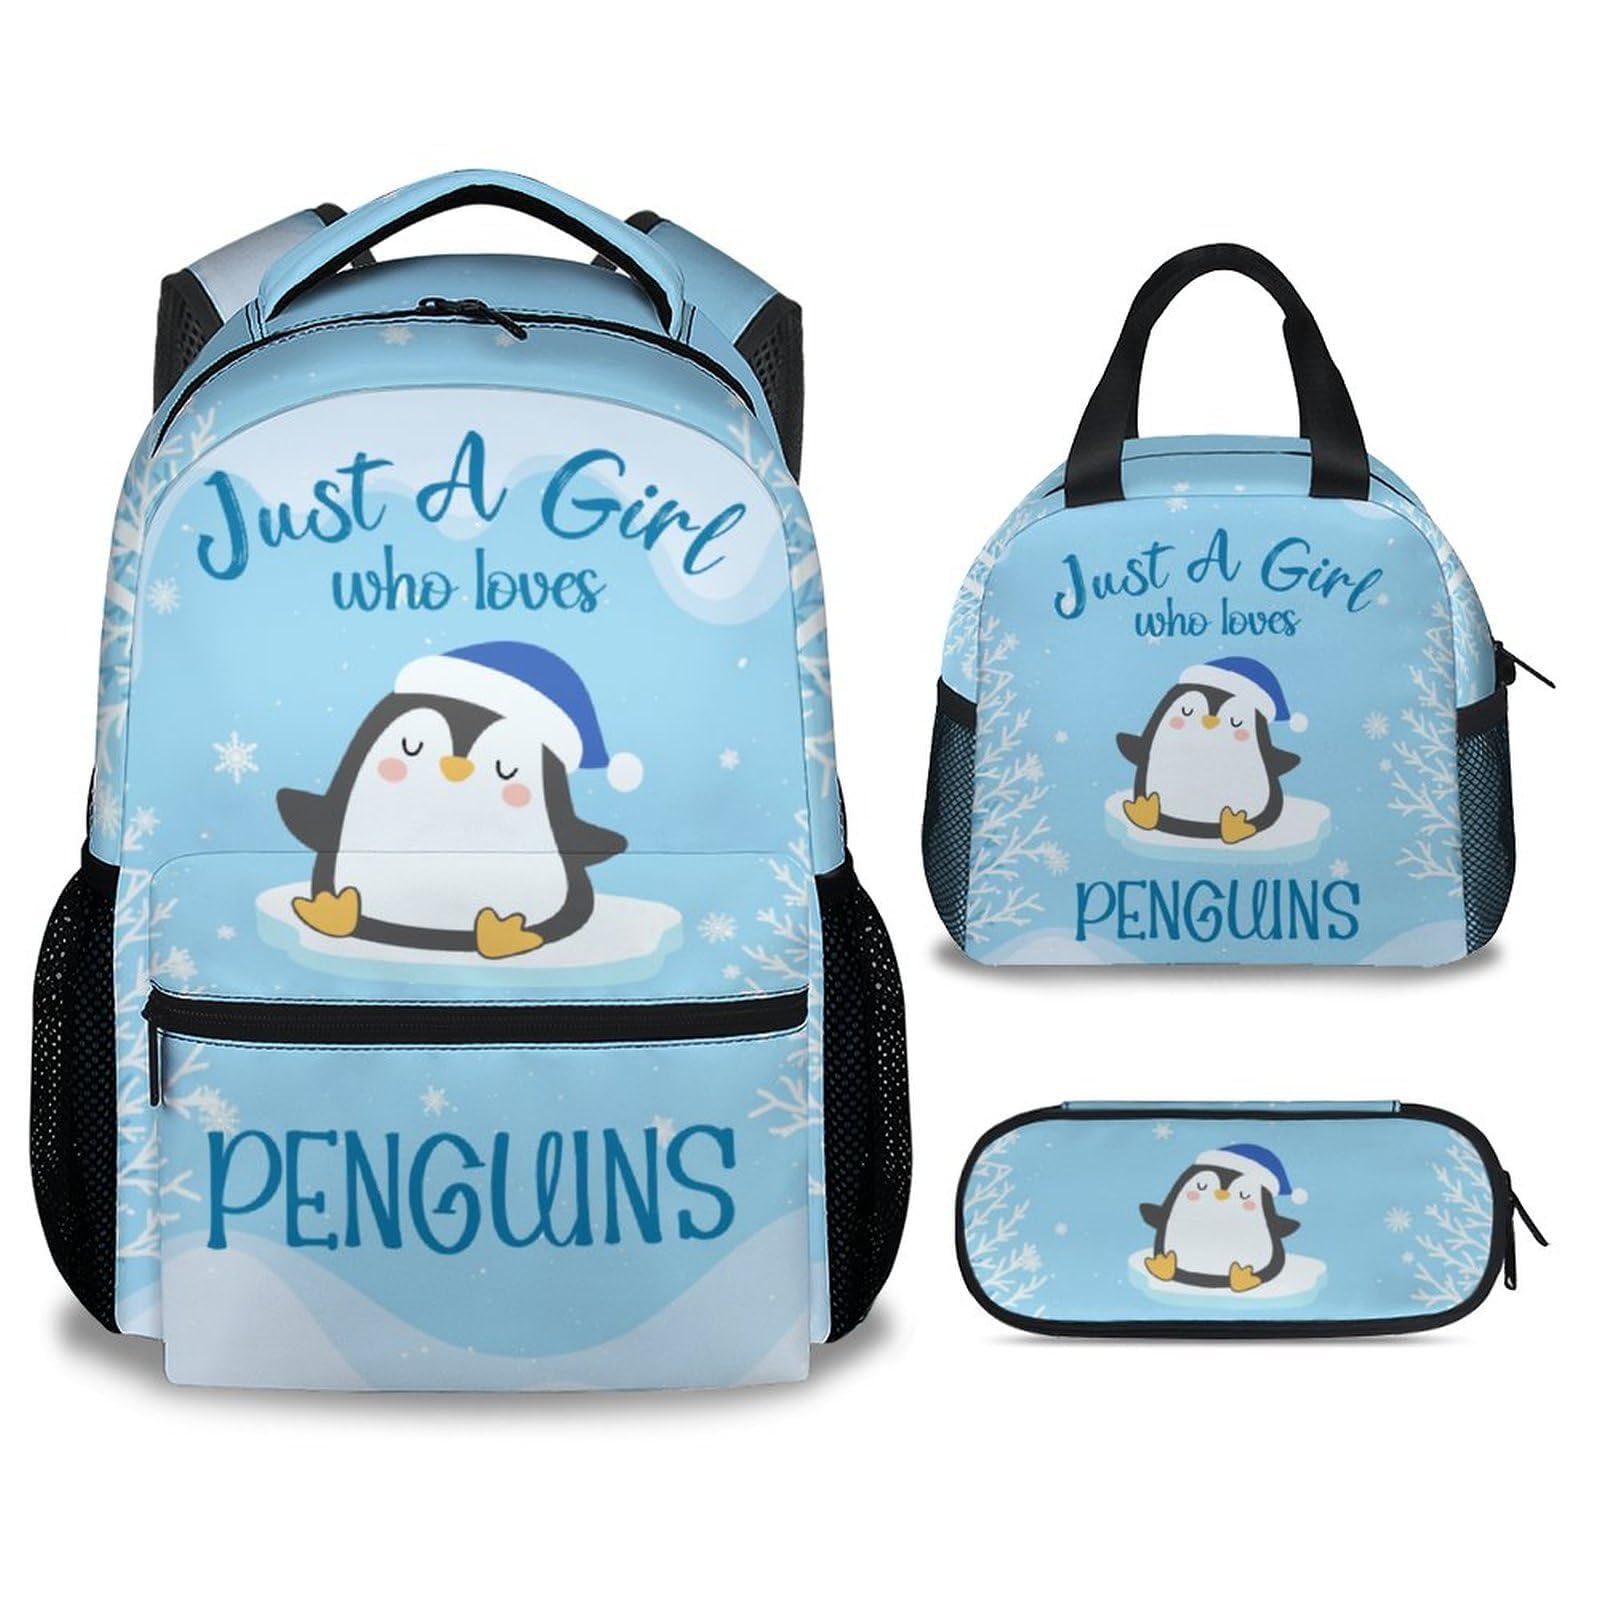 CUNEXTTIME Penguin Backpack with Lunch Box, Set of 3 School Backpacks Matching Combo for Girls Boys, Cute Blue Bookbag and Pencil Case Bundle